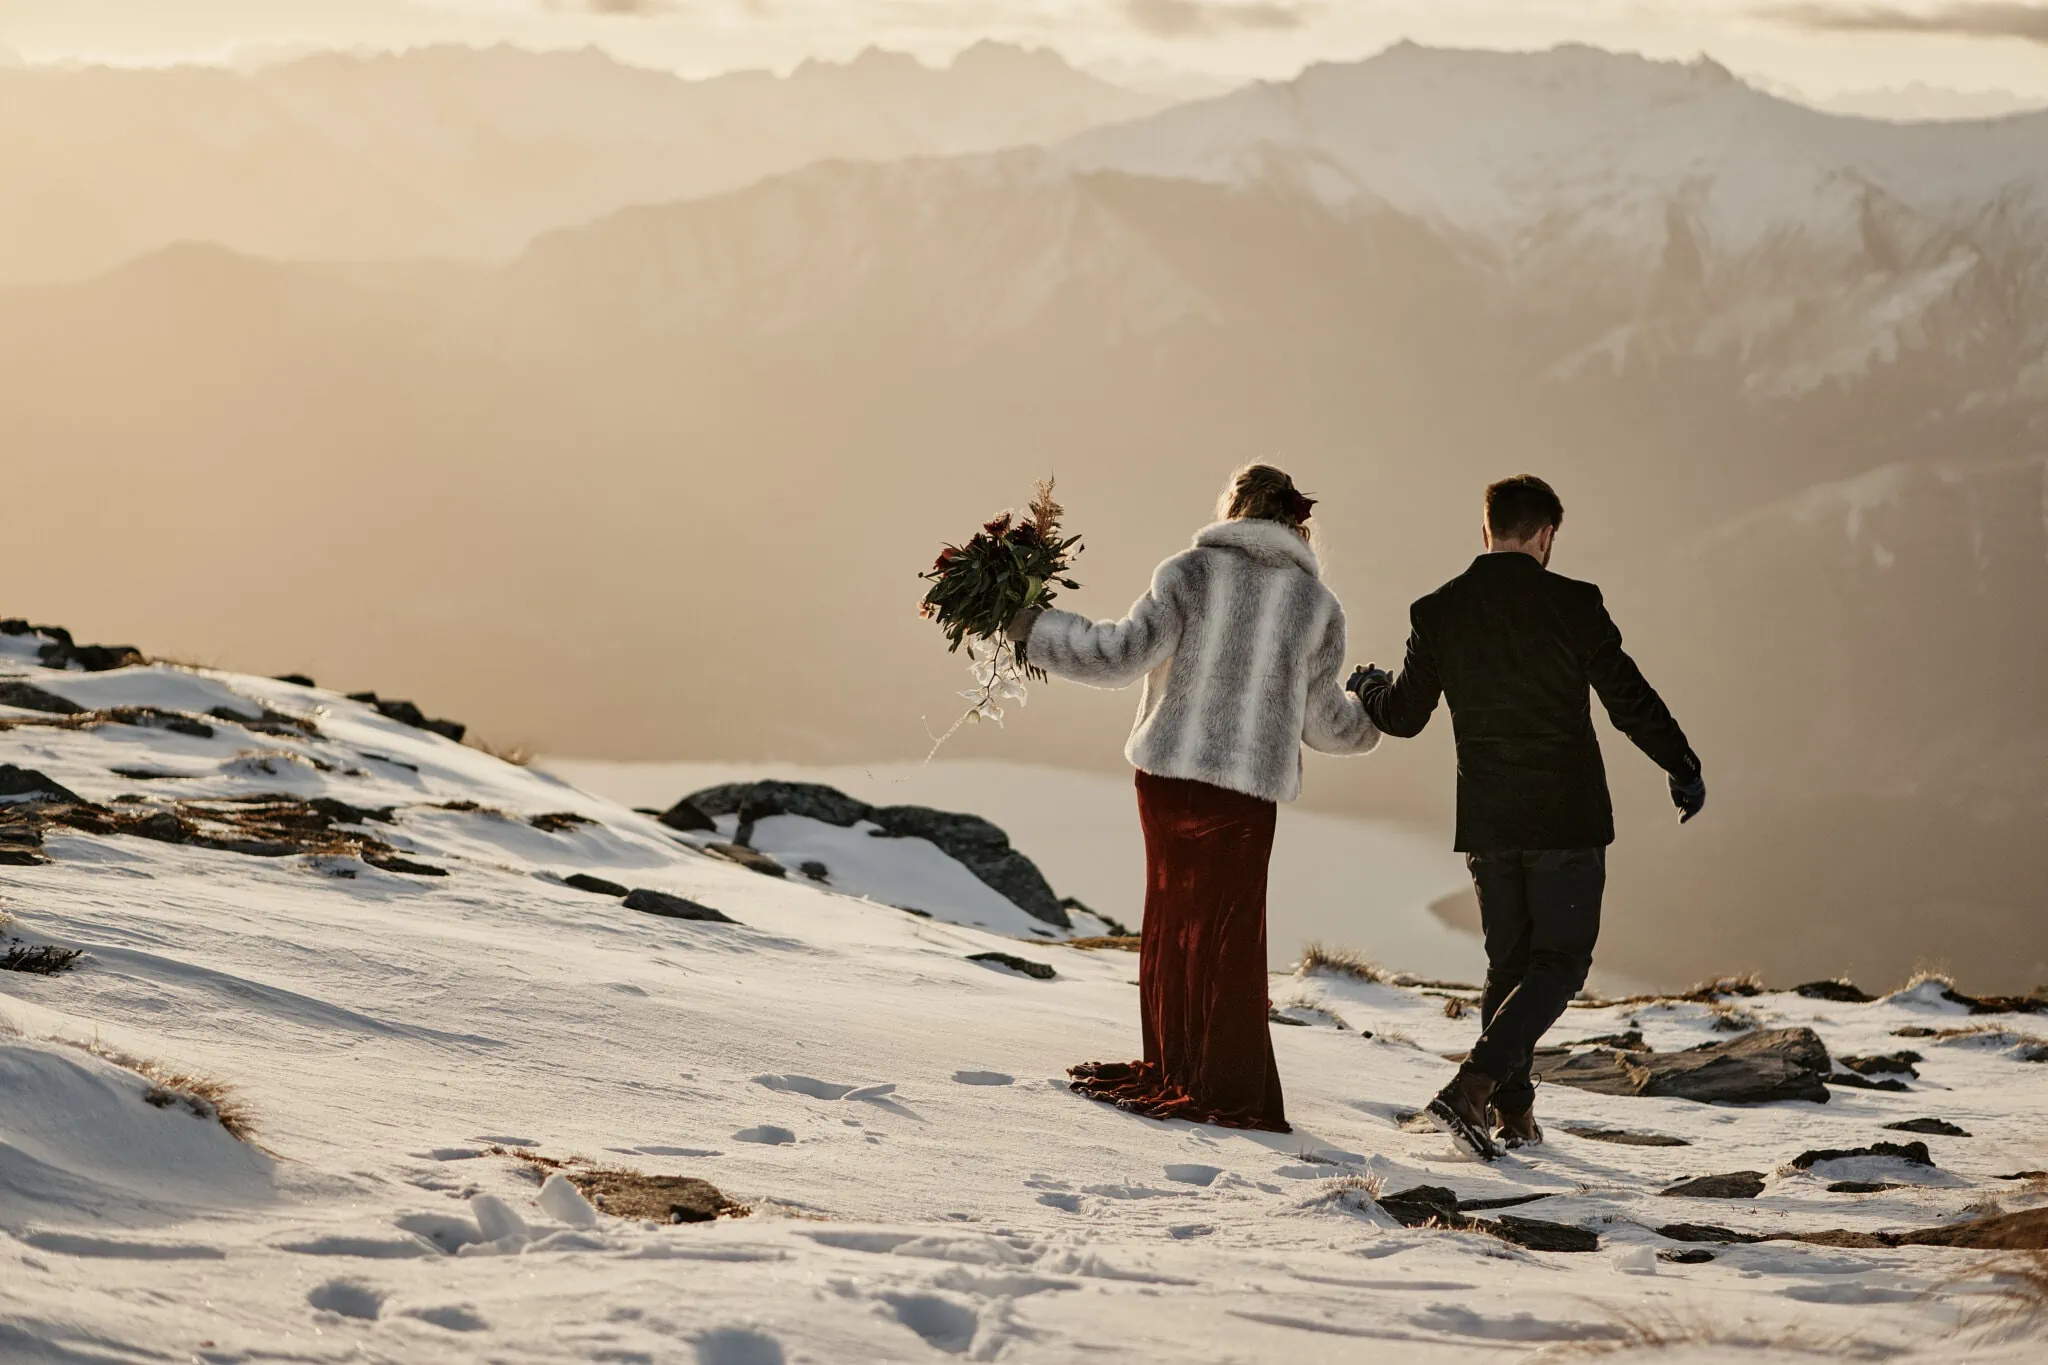 Keywords used: Claire and Rob, snowy mountain.

Description: Claire and Rob have a picturesque heli elopement wedding at Cecil Peak, walking up a snowy mountain.